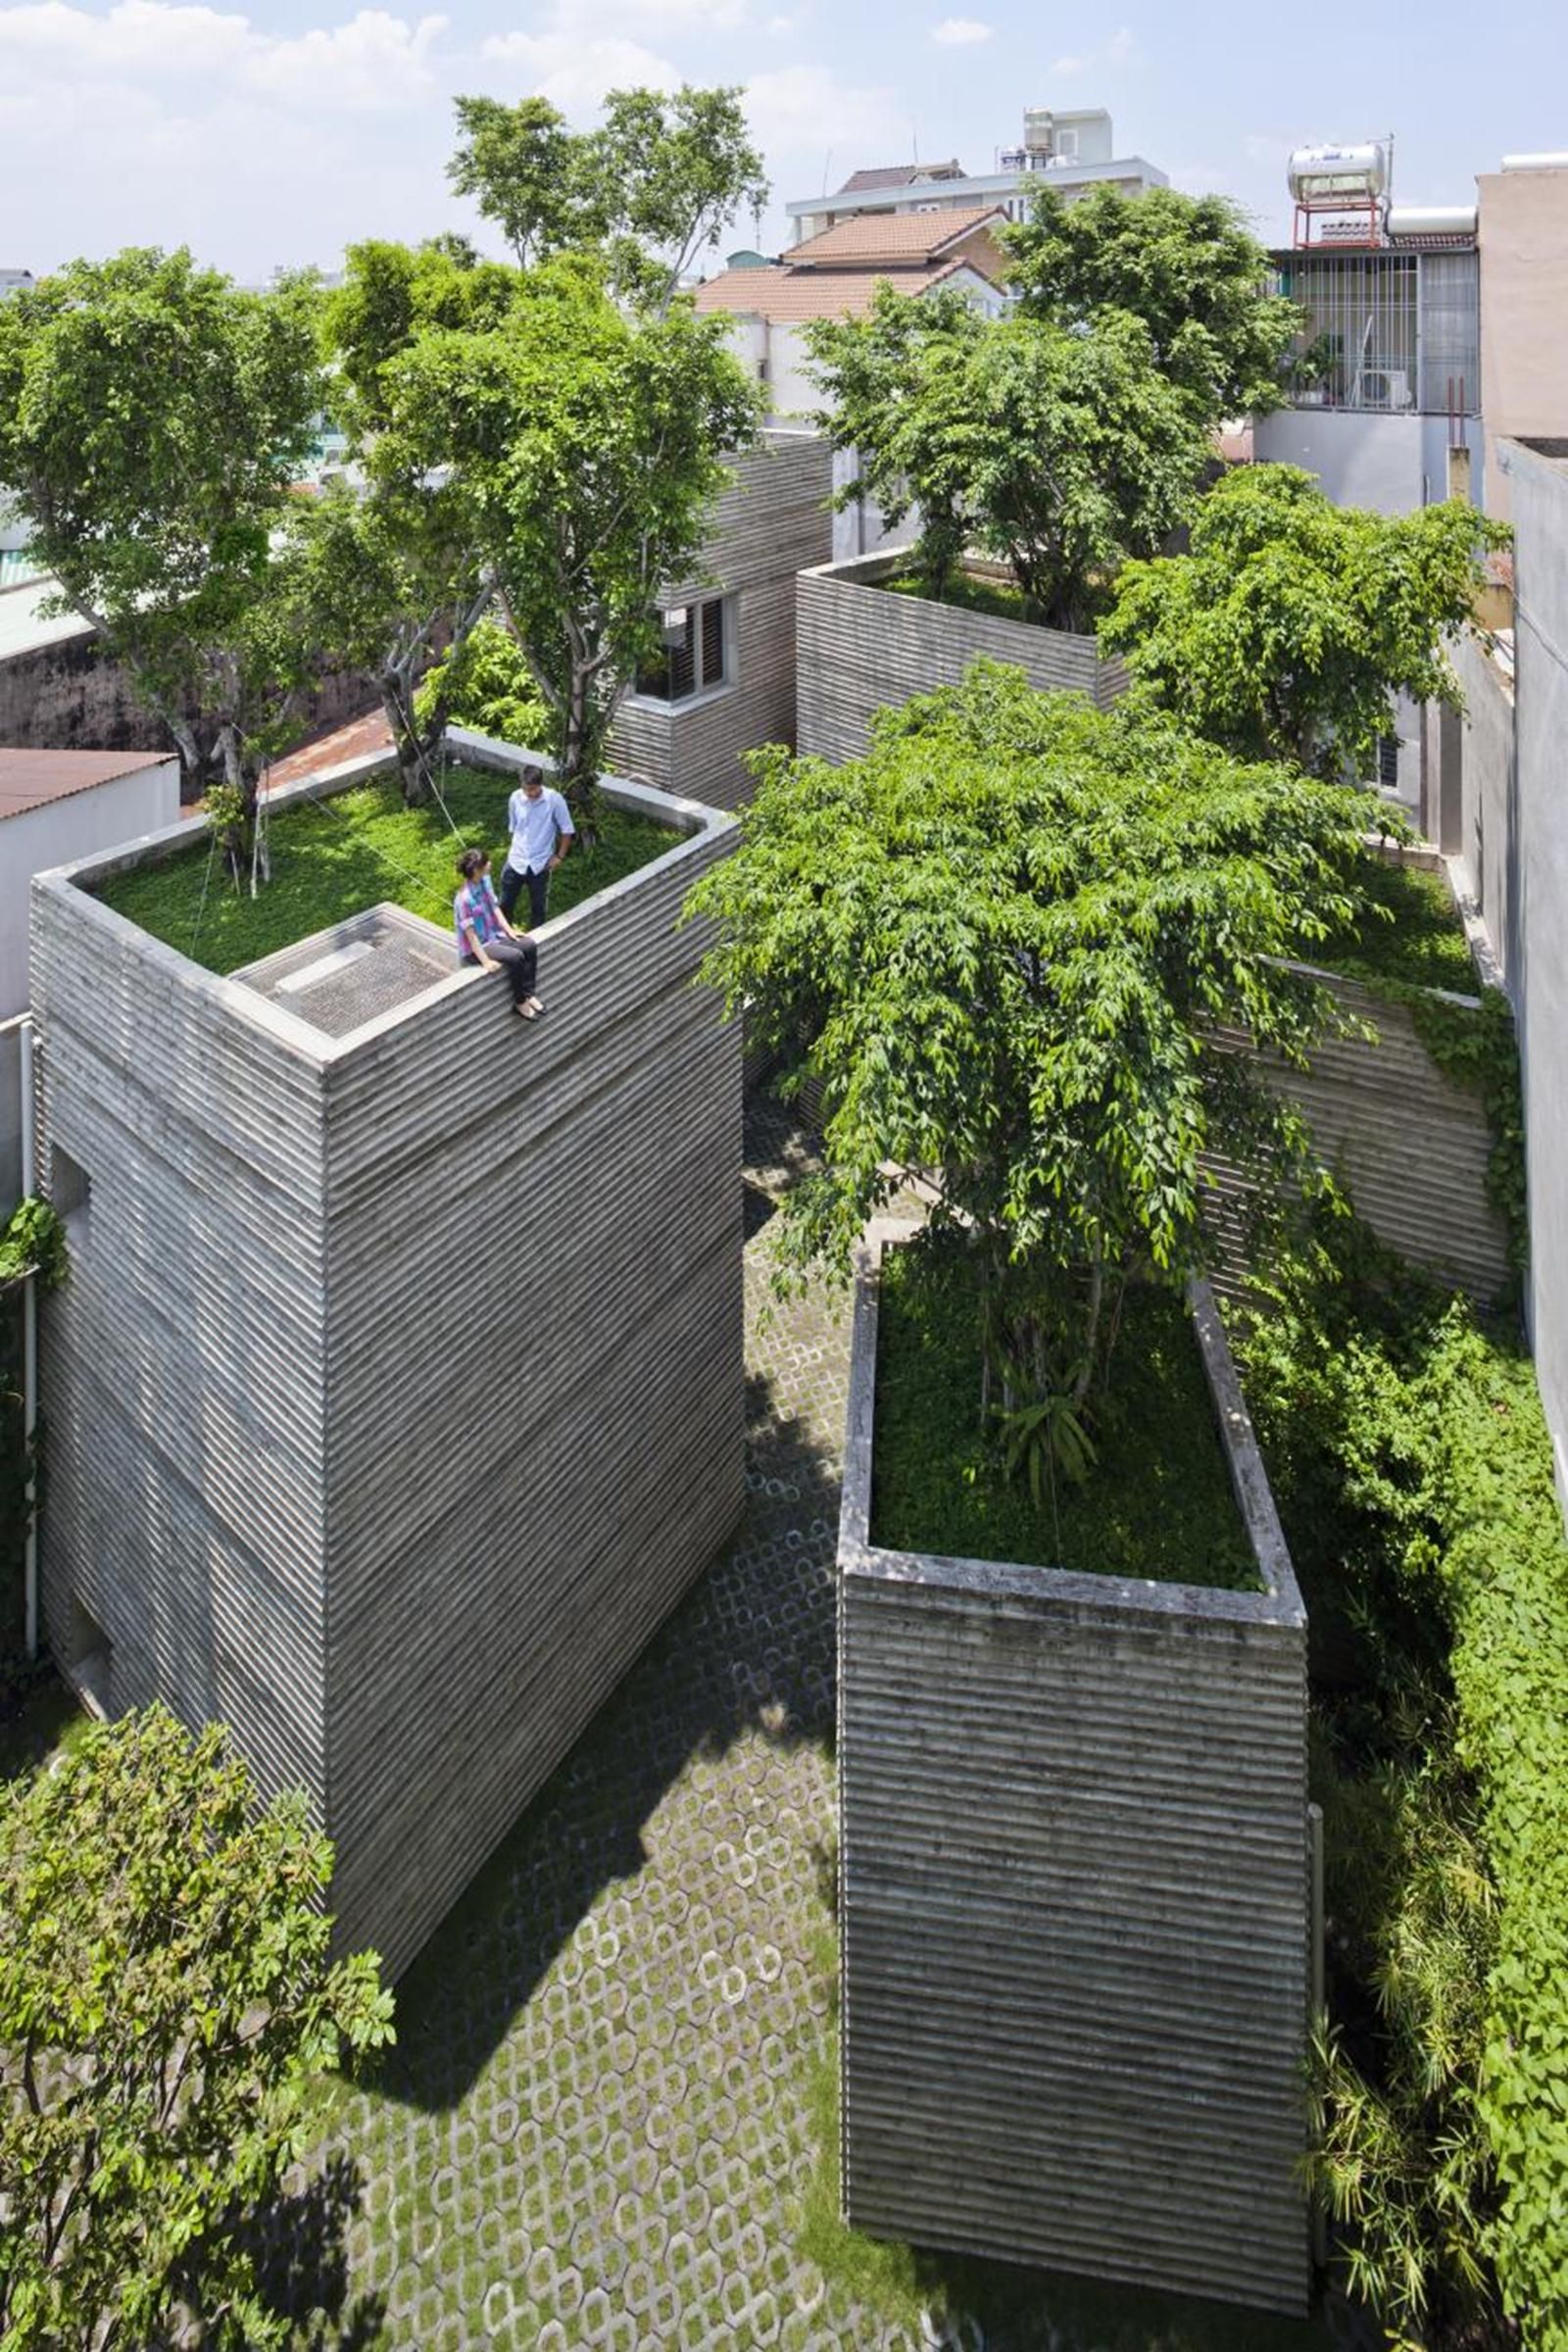 House for Trees / Vo Trong Nghia Architects